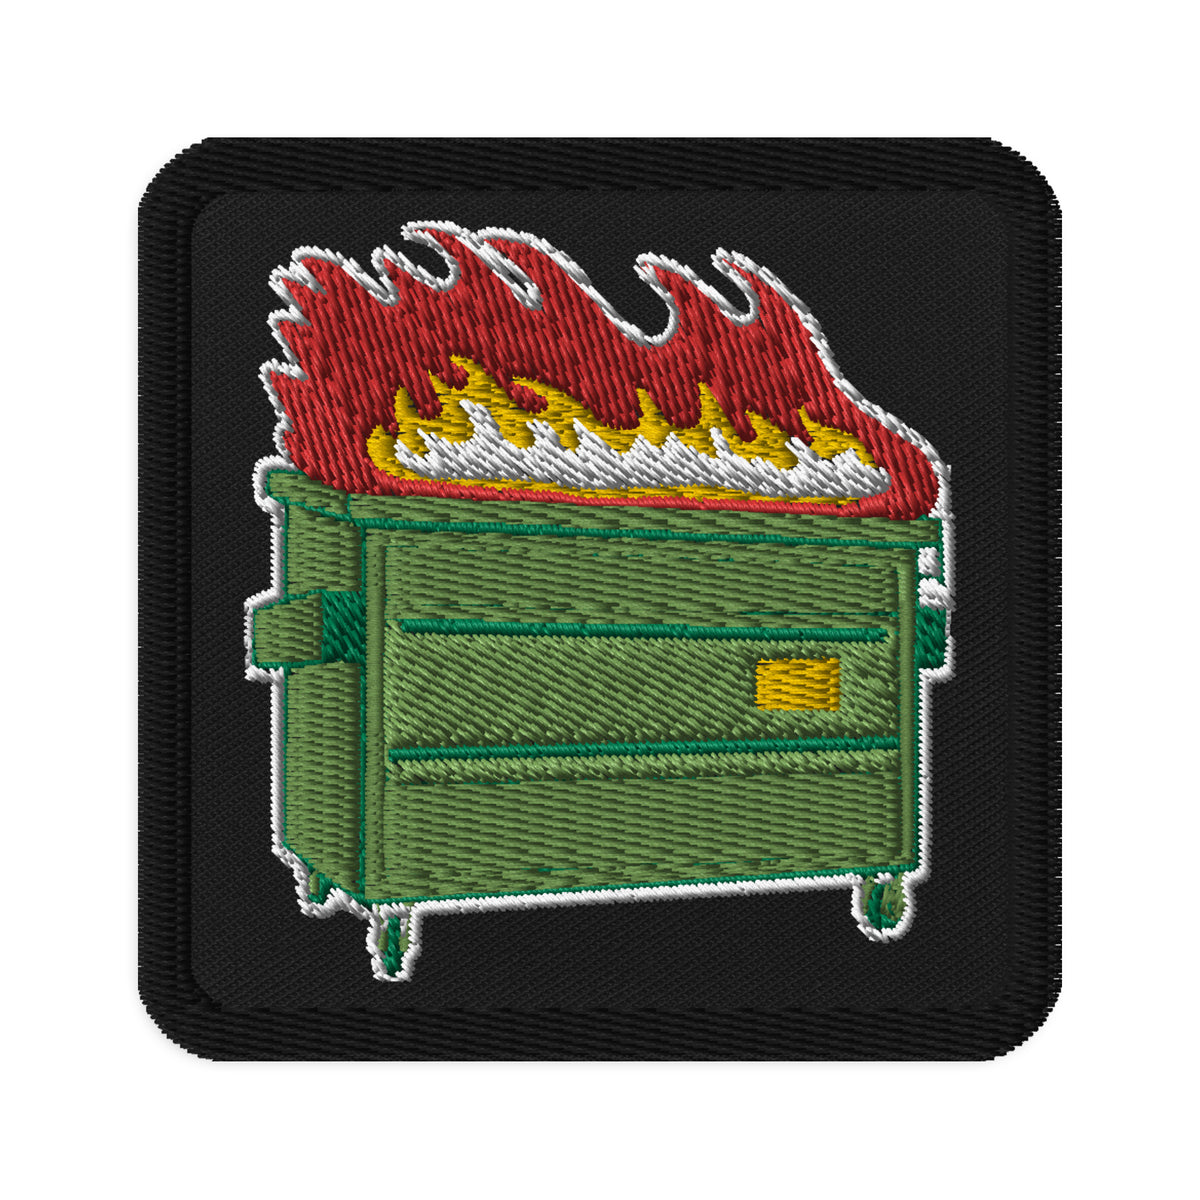 Dumpster Fire Embroidered Patch